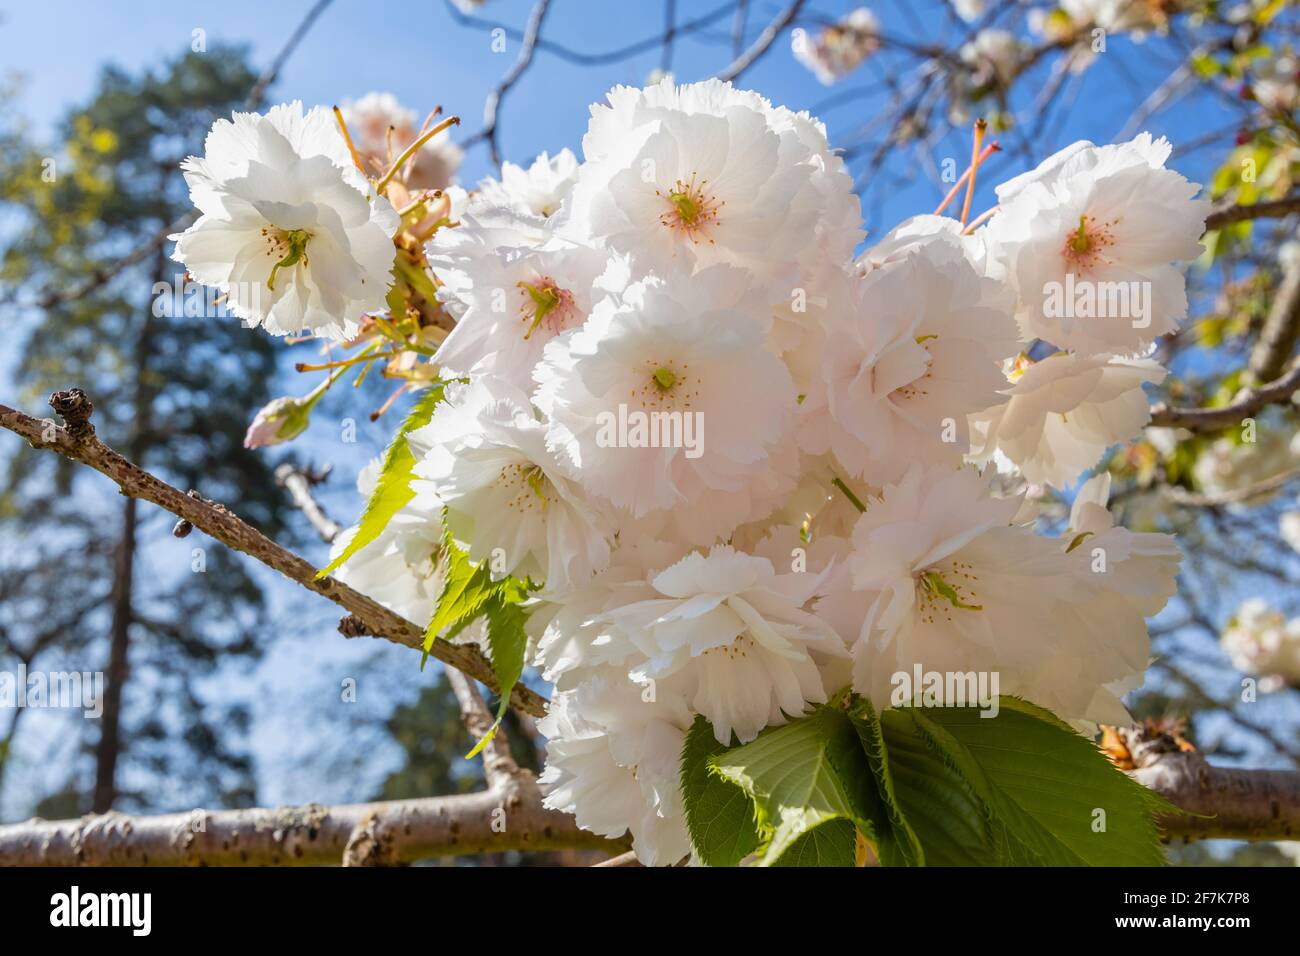 Close-up view of dense white pretty blossom flowers on a flowering ornamental cherry tree in a garden in spring in Surrey, south-east England, UK Stock Photo